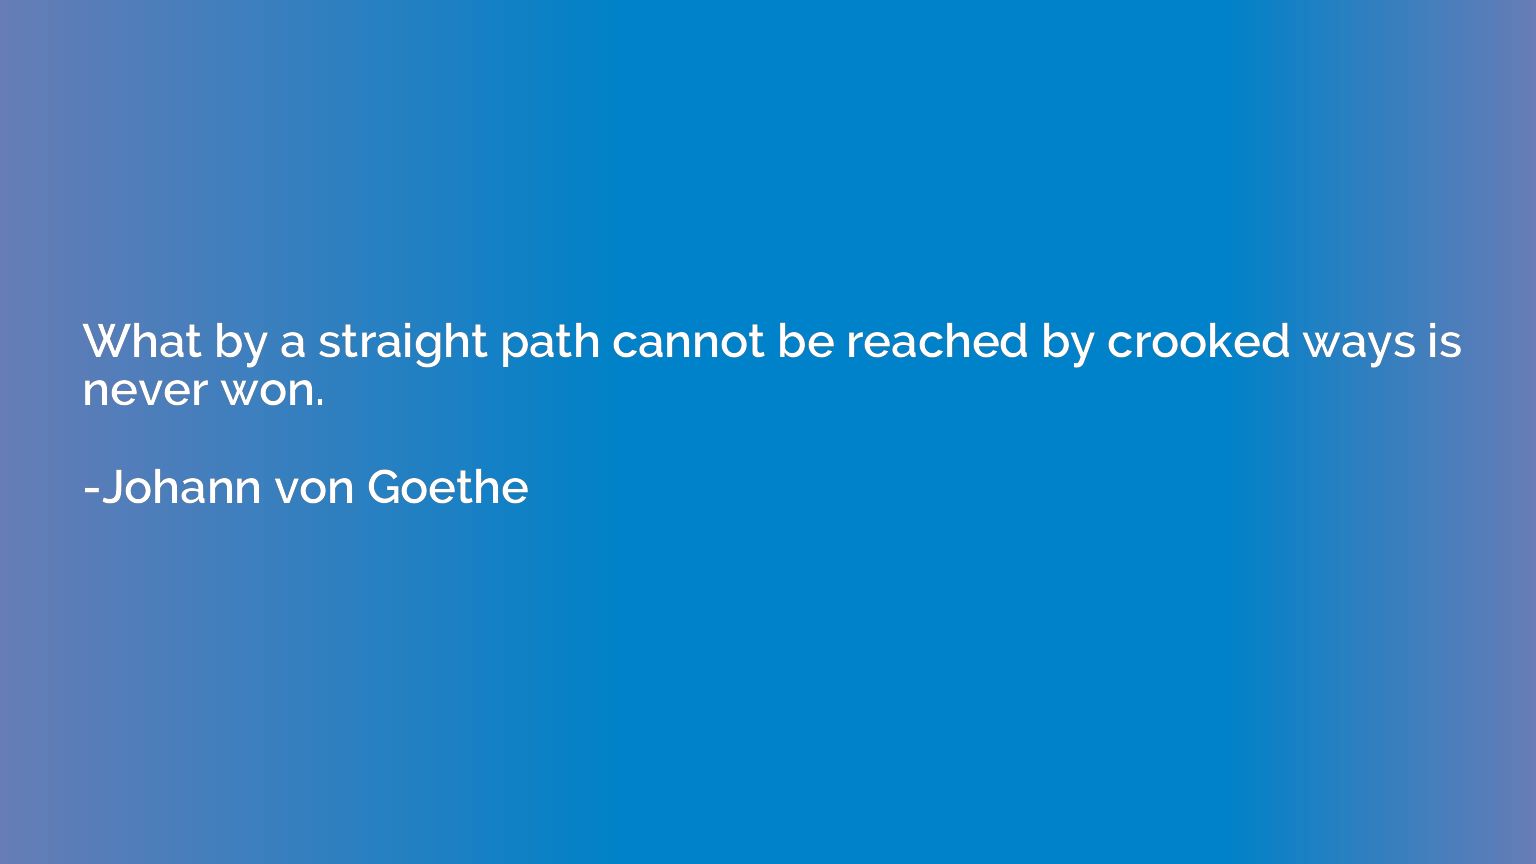 What by a straight path cannot be reached by crooked ways is